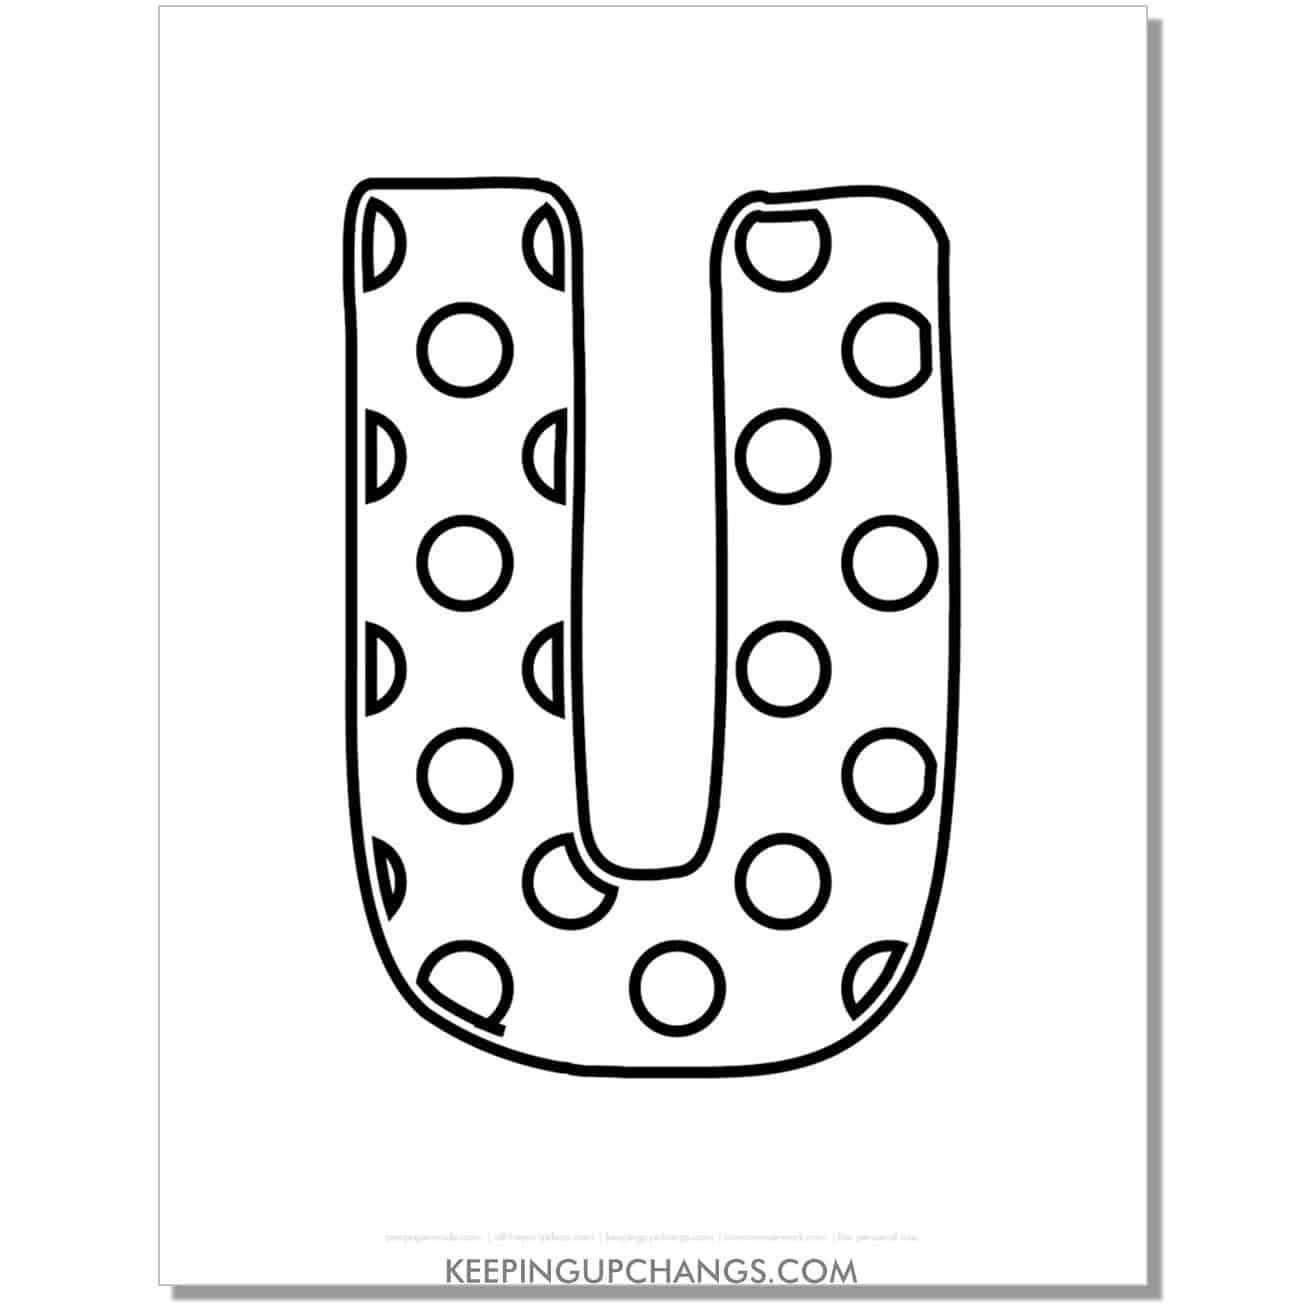 free alphabet letter u coloring page with polka dots for toddlers, preschool, kindergarten.